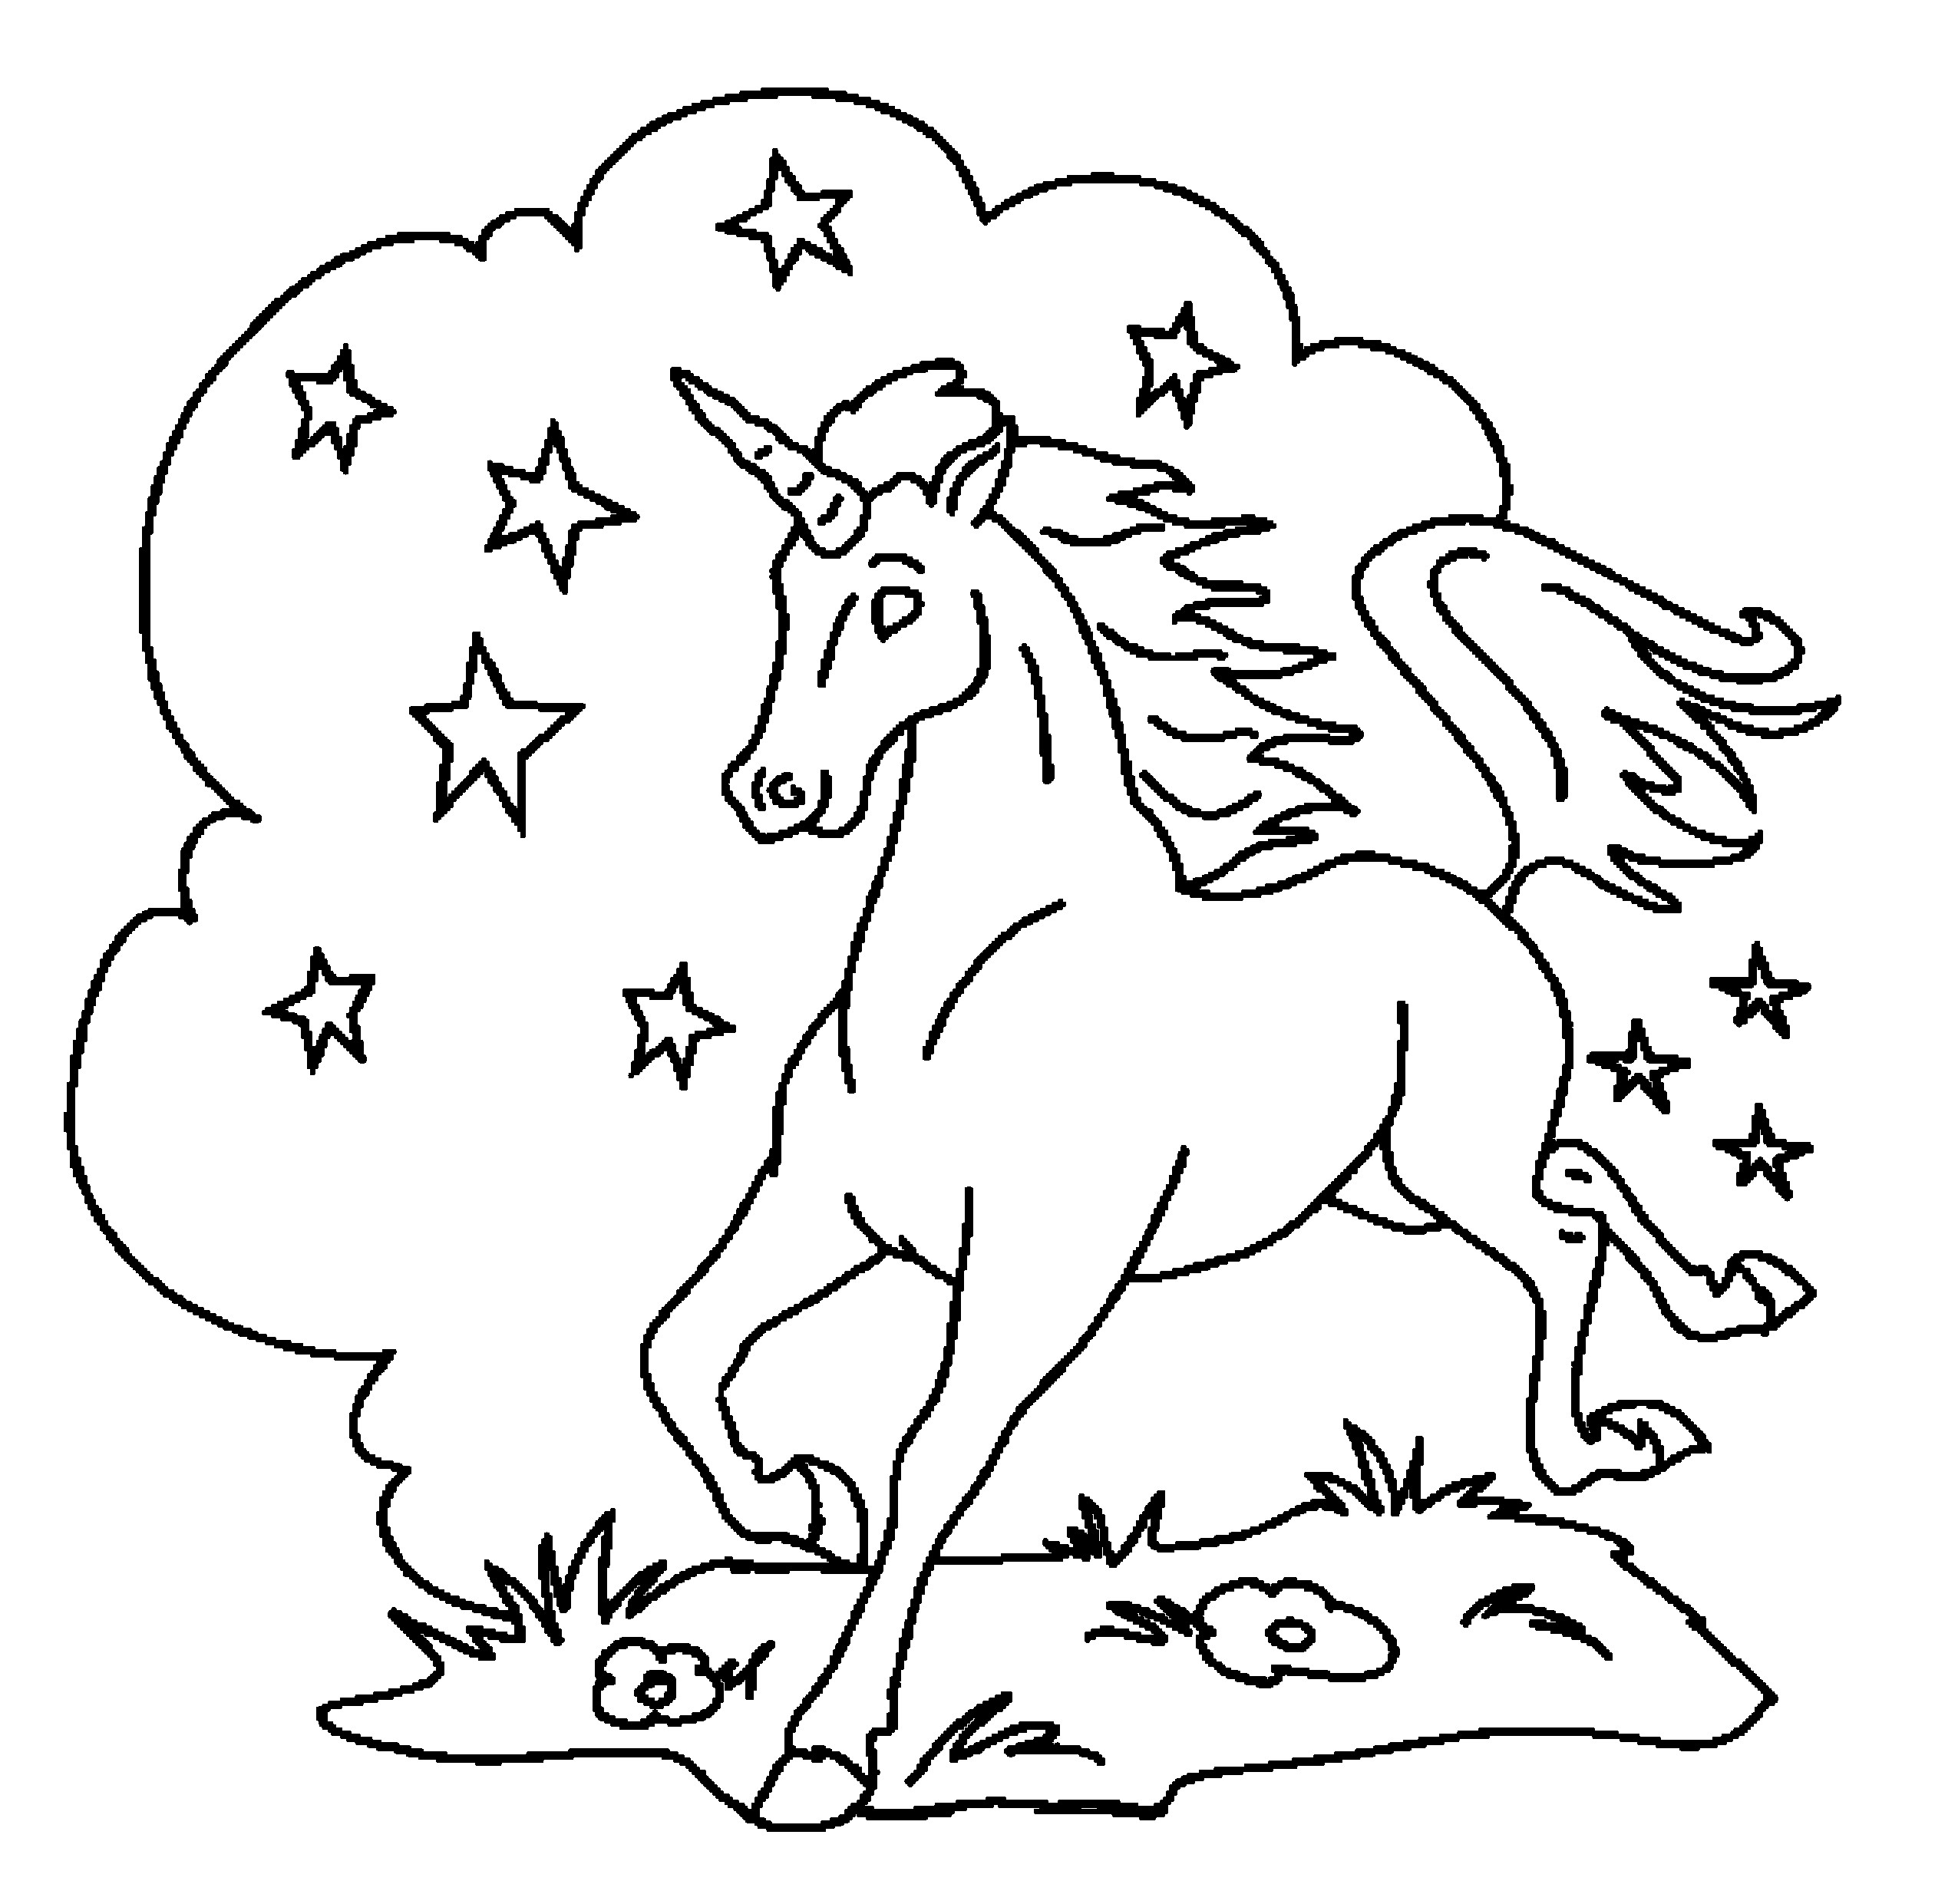 Kids Coloring Pages Unicorn
 Unicorn Coloring Pages for Children – Best Apps For Kids